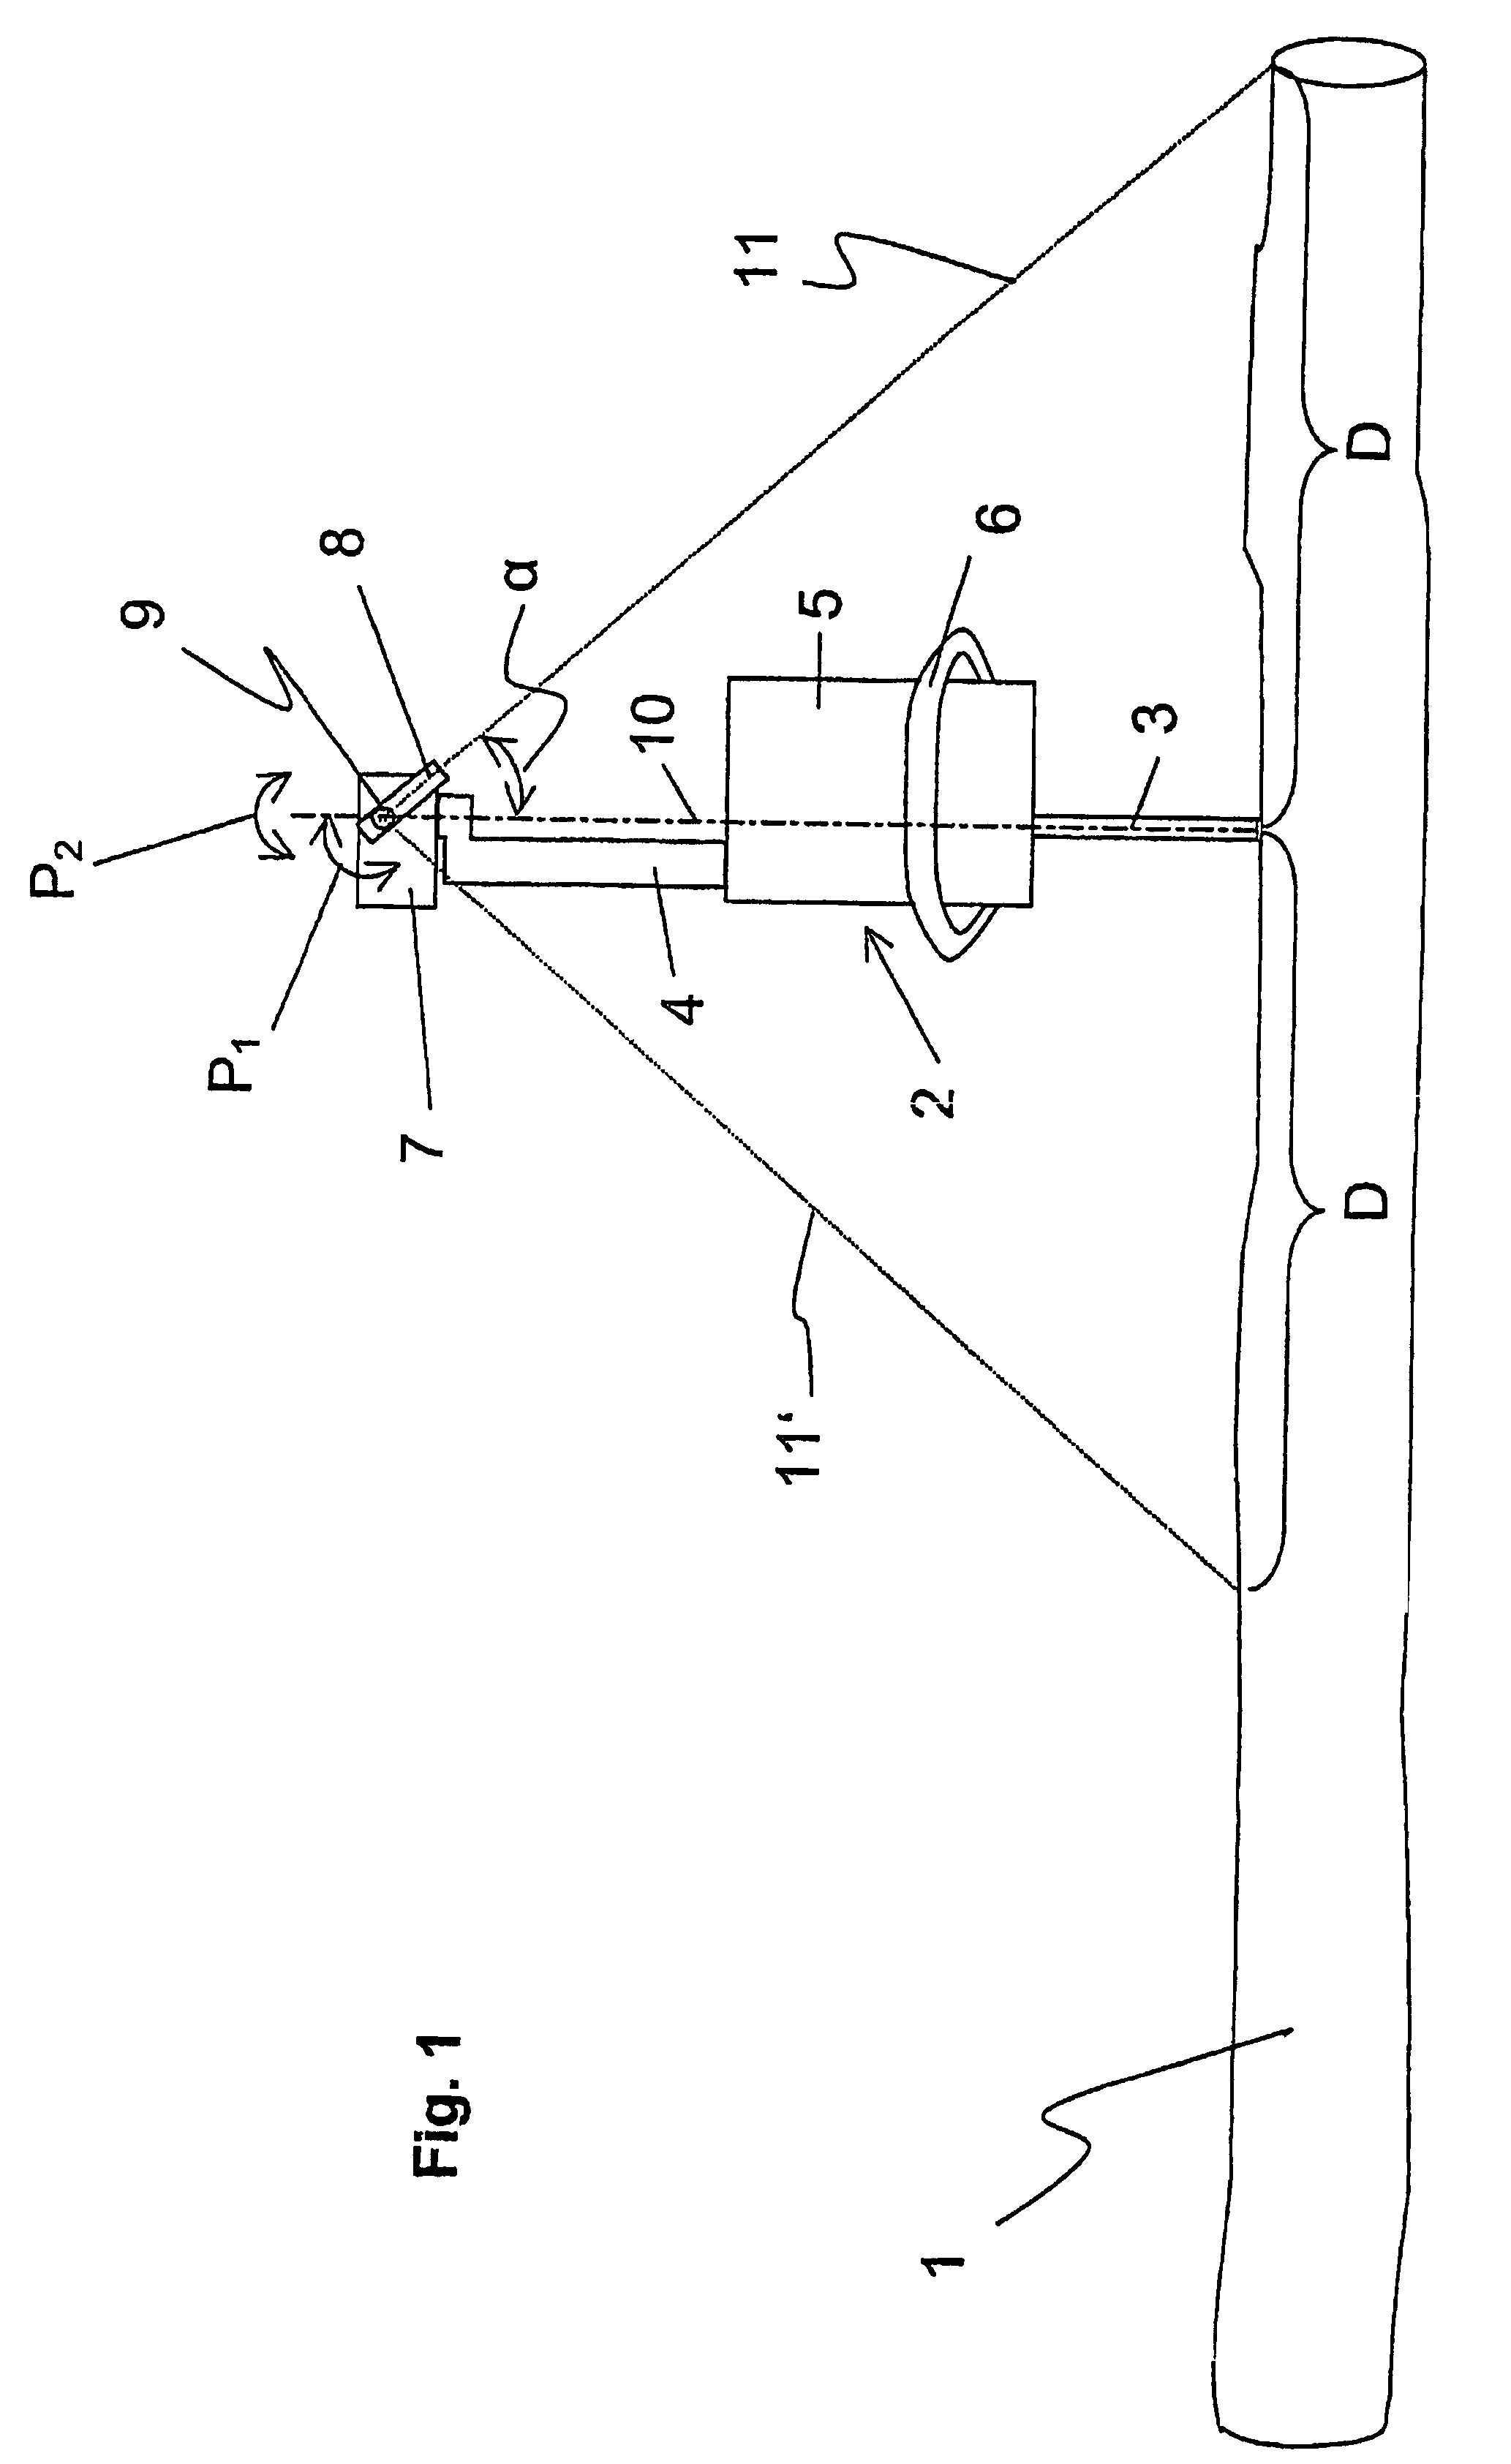 Power saw comprising a display device